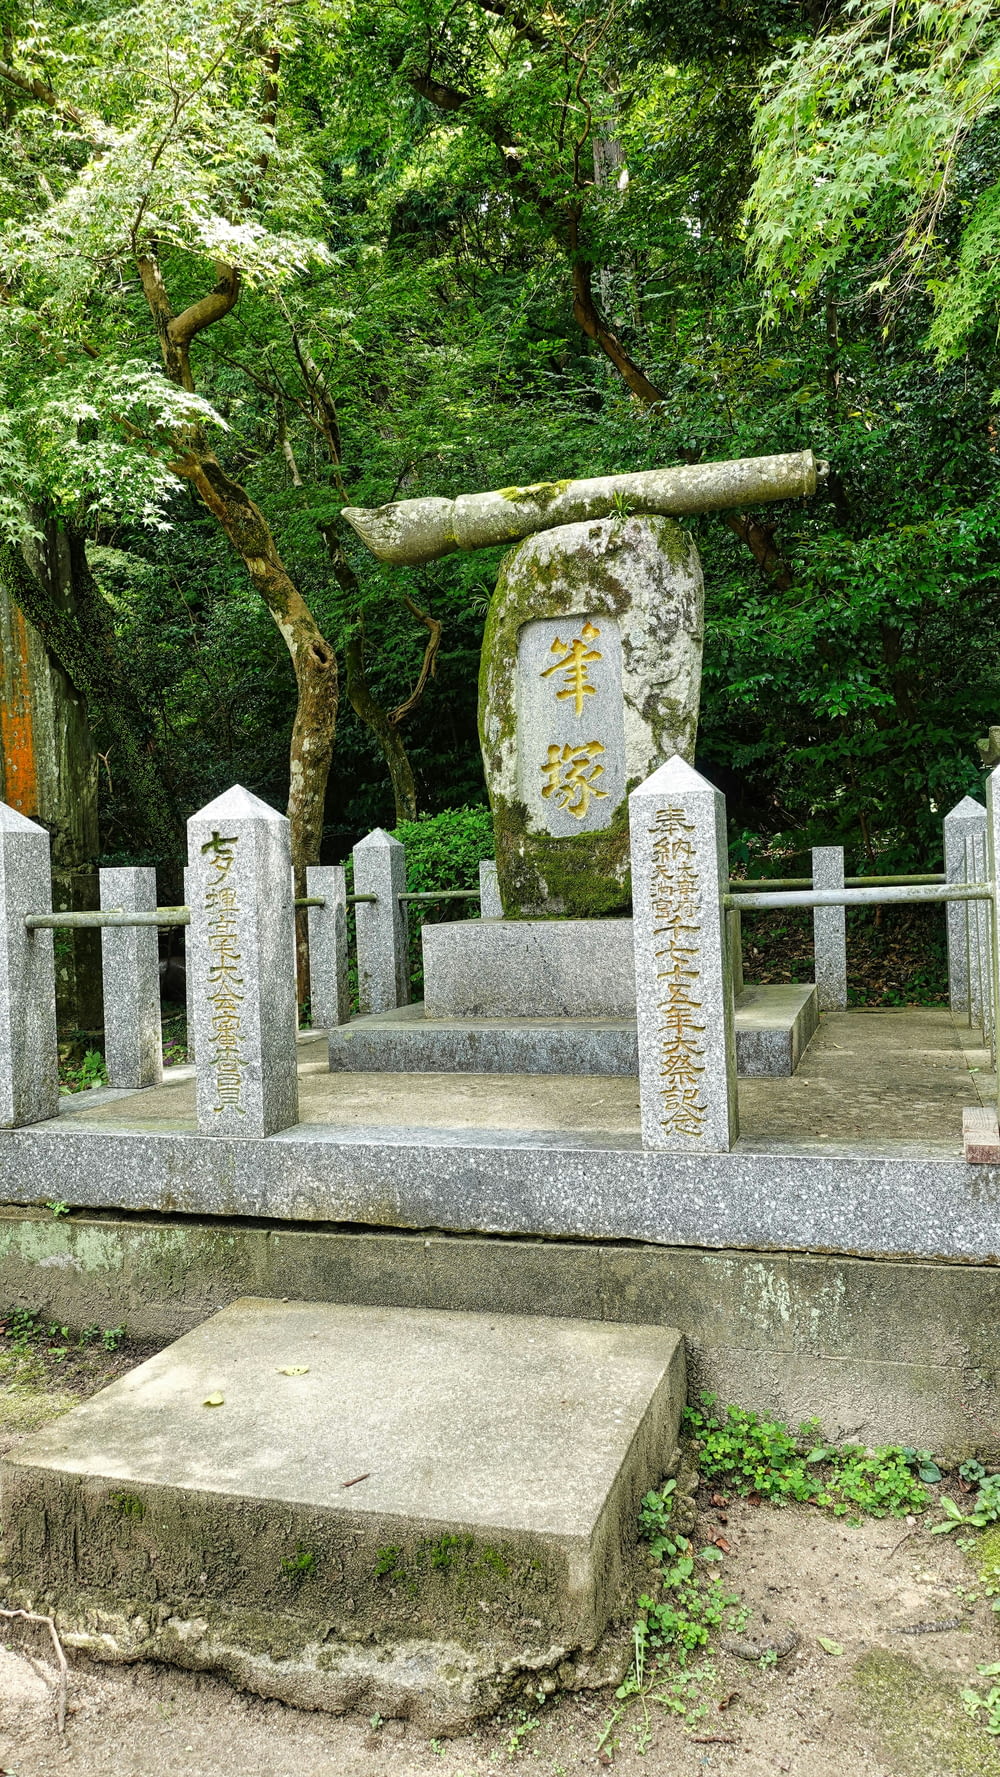 a group of stone statues with writing on them